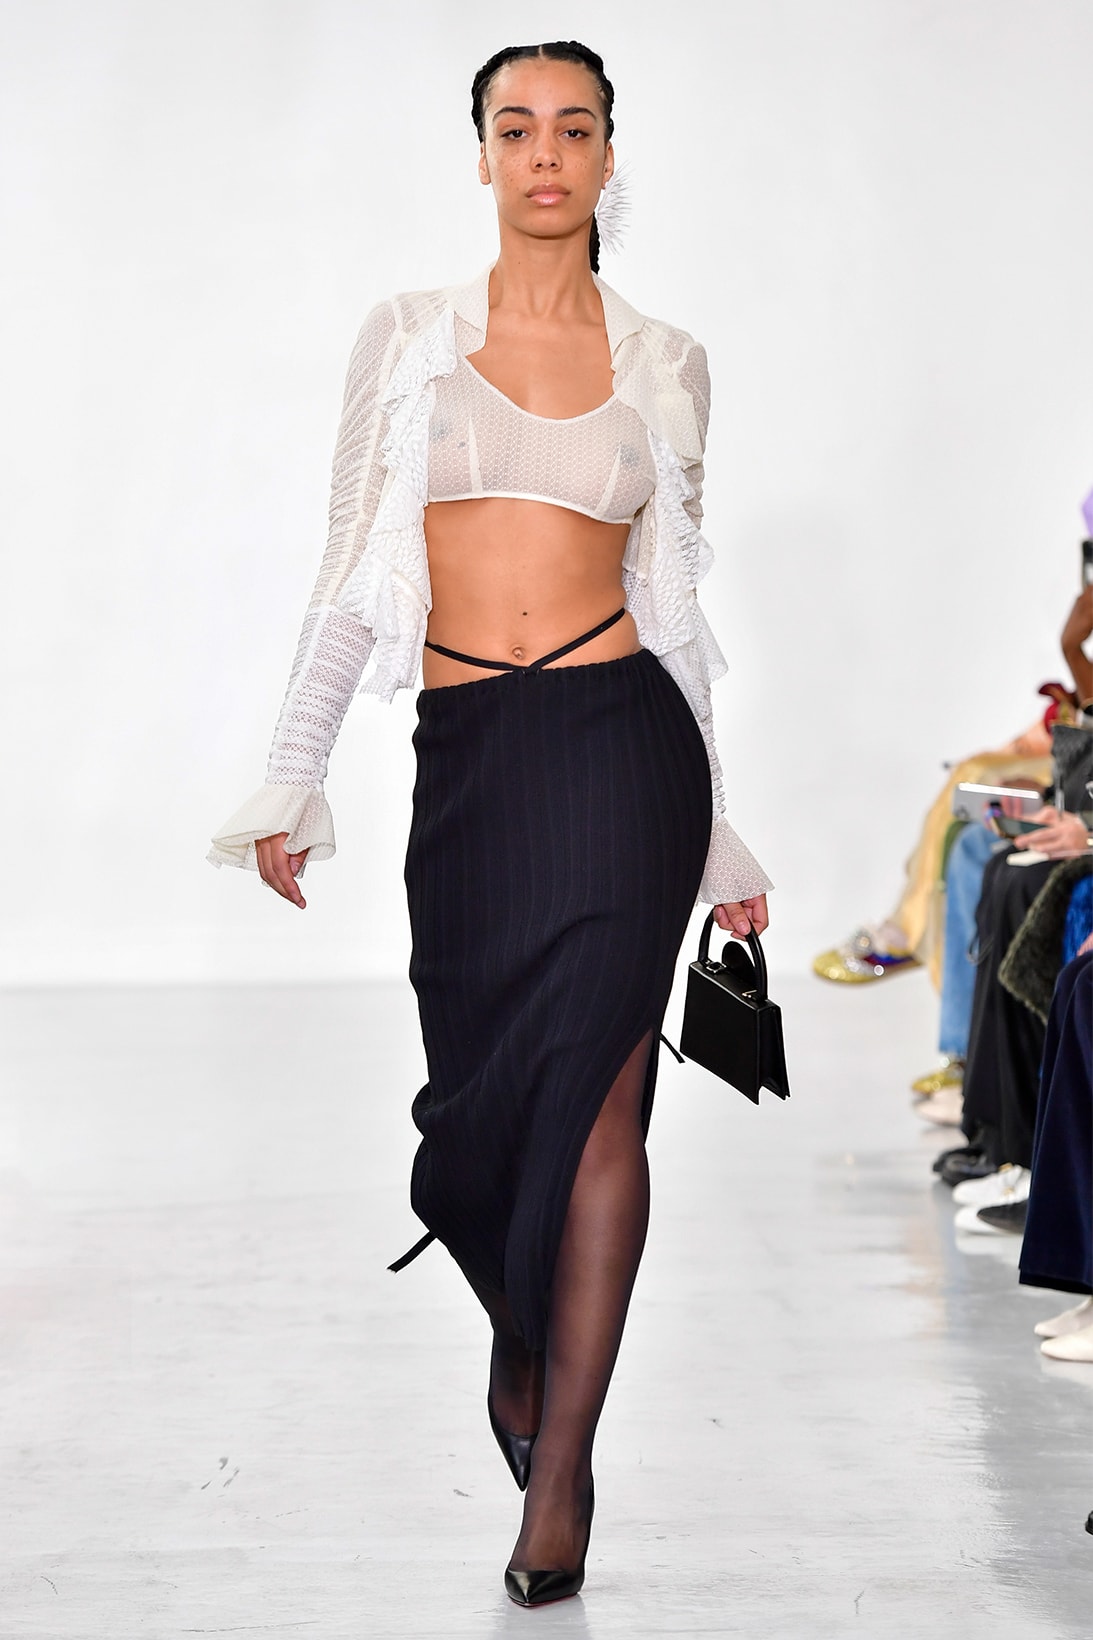 Ester Manas Fall Winter Collection Size Inclusivity Cut-Outs Fashion Week Runway Show Photos Flared Top Skirt White Black